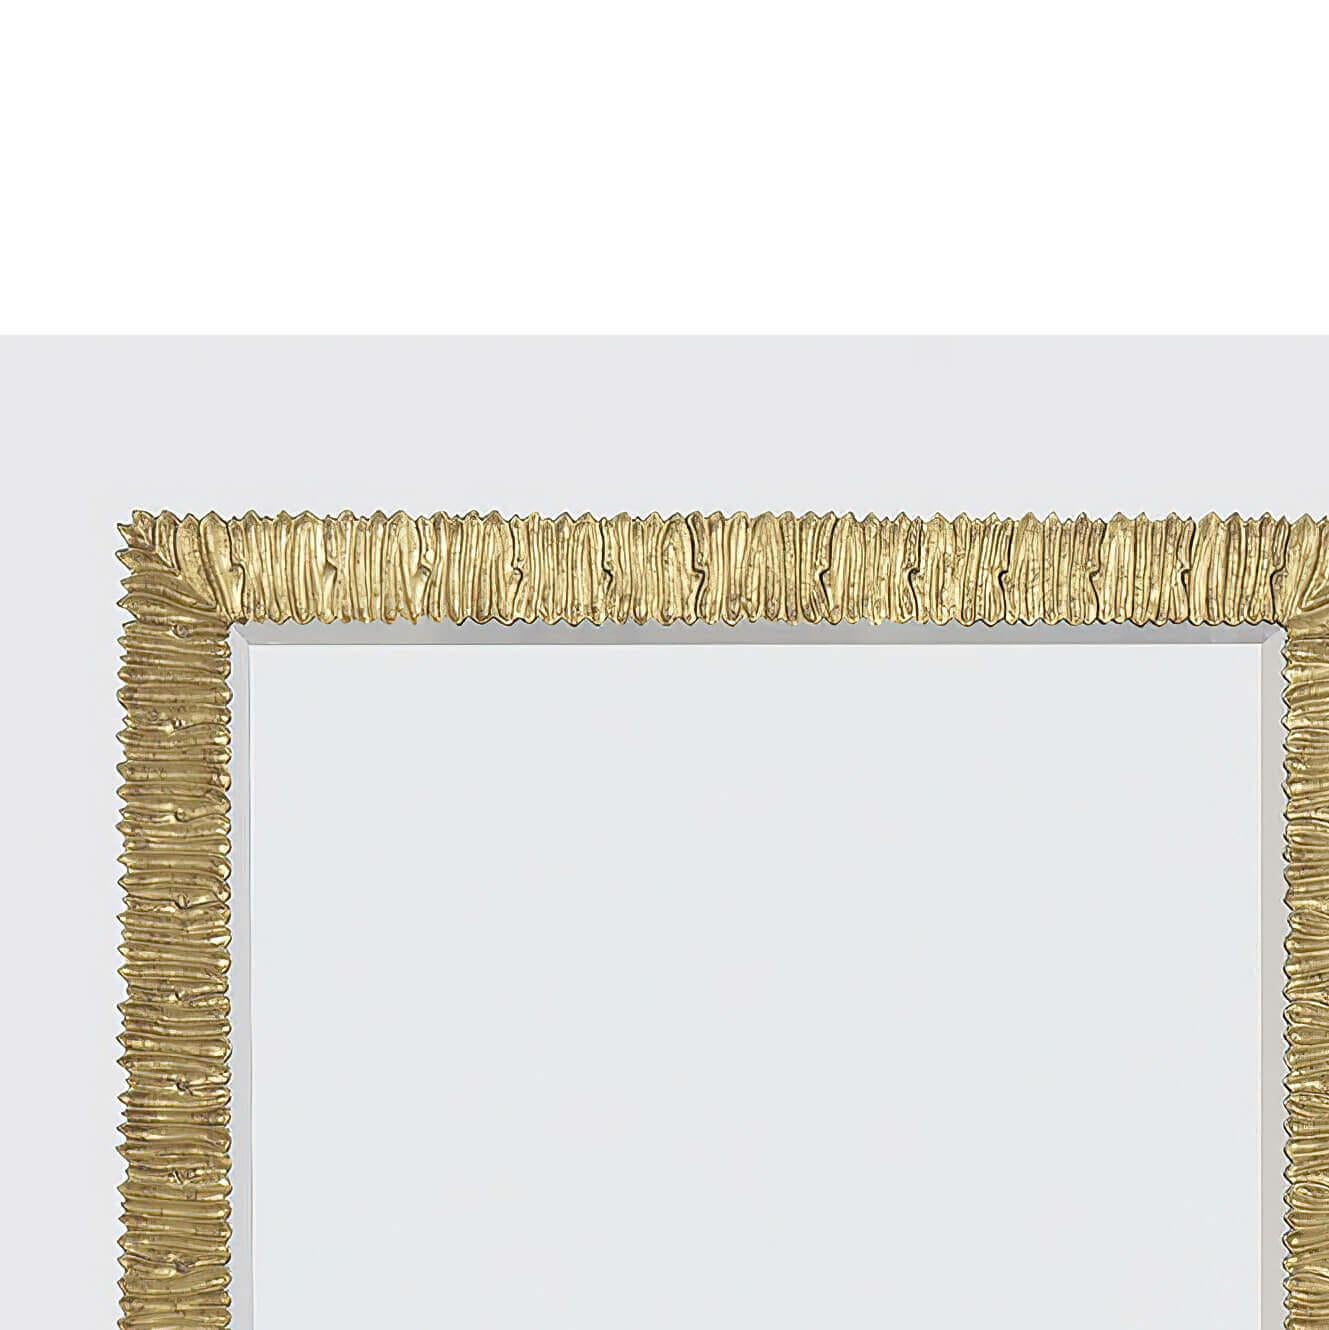 An organic modern silver leaf formed and molded rectangular wall mirror. This mirror can be hung horizontally or vertically. The silver leaf finish is applied to an aluminum cast frame.

Dimensions: 38